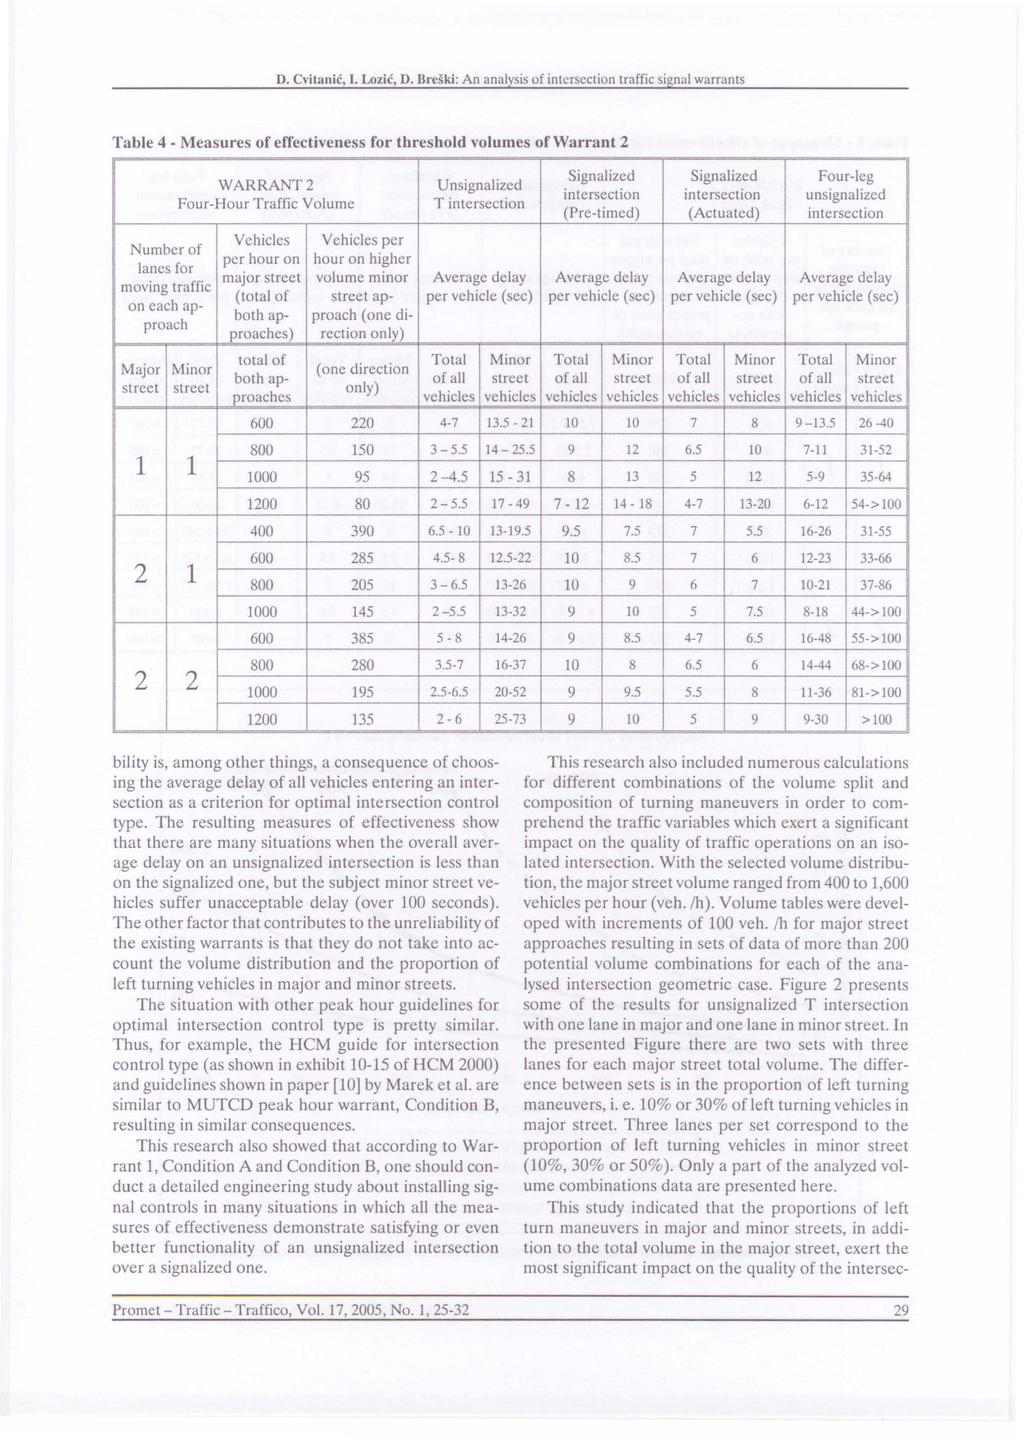 Table 4- Measures of effectiveness for threshold volumes of Warrant 2 Number of lanes for moving traffic on each approach Major Minor street street WARRANT2 Four-Hour Traffic Volume Unsignalized T